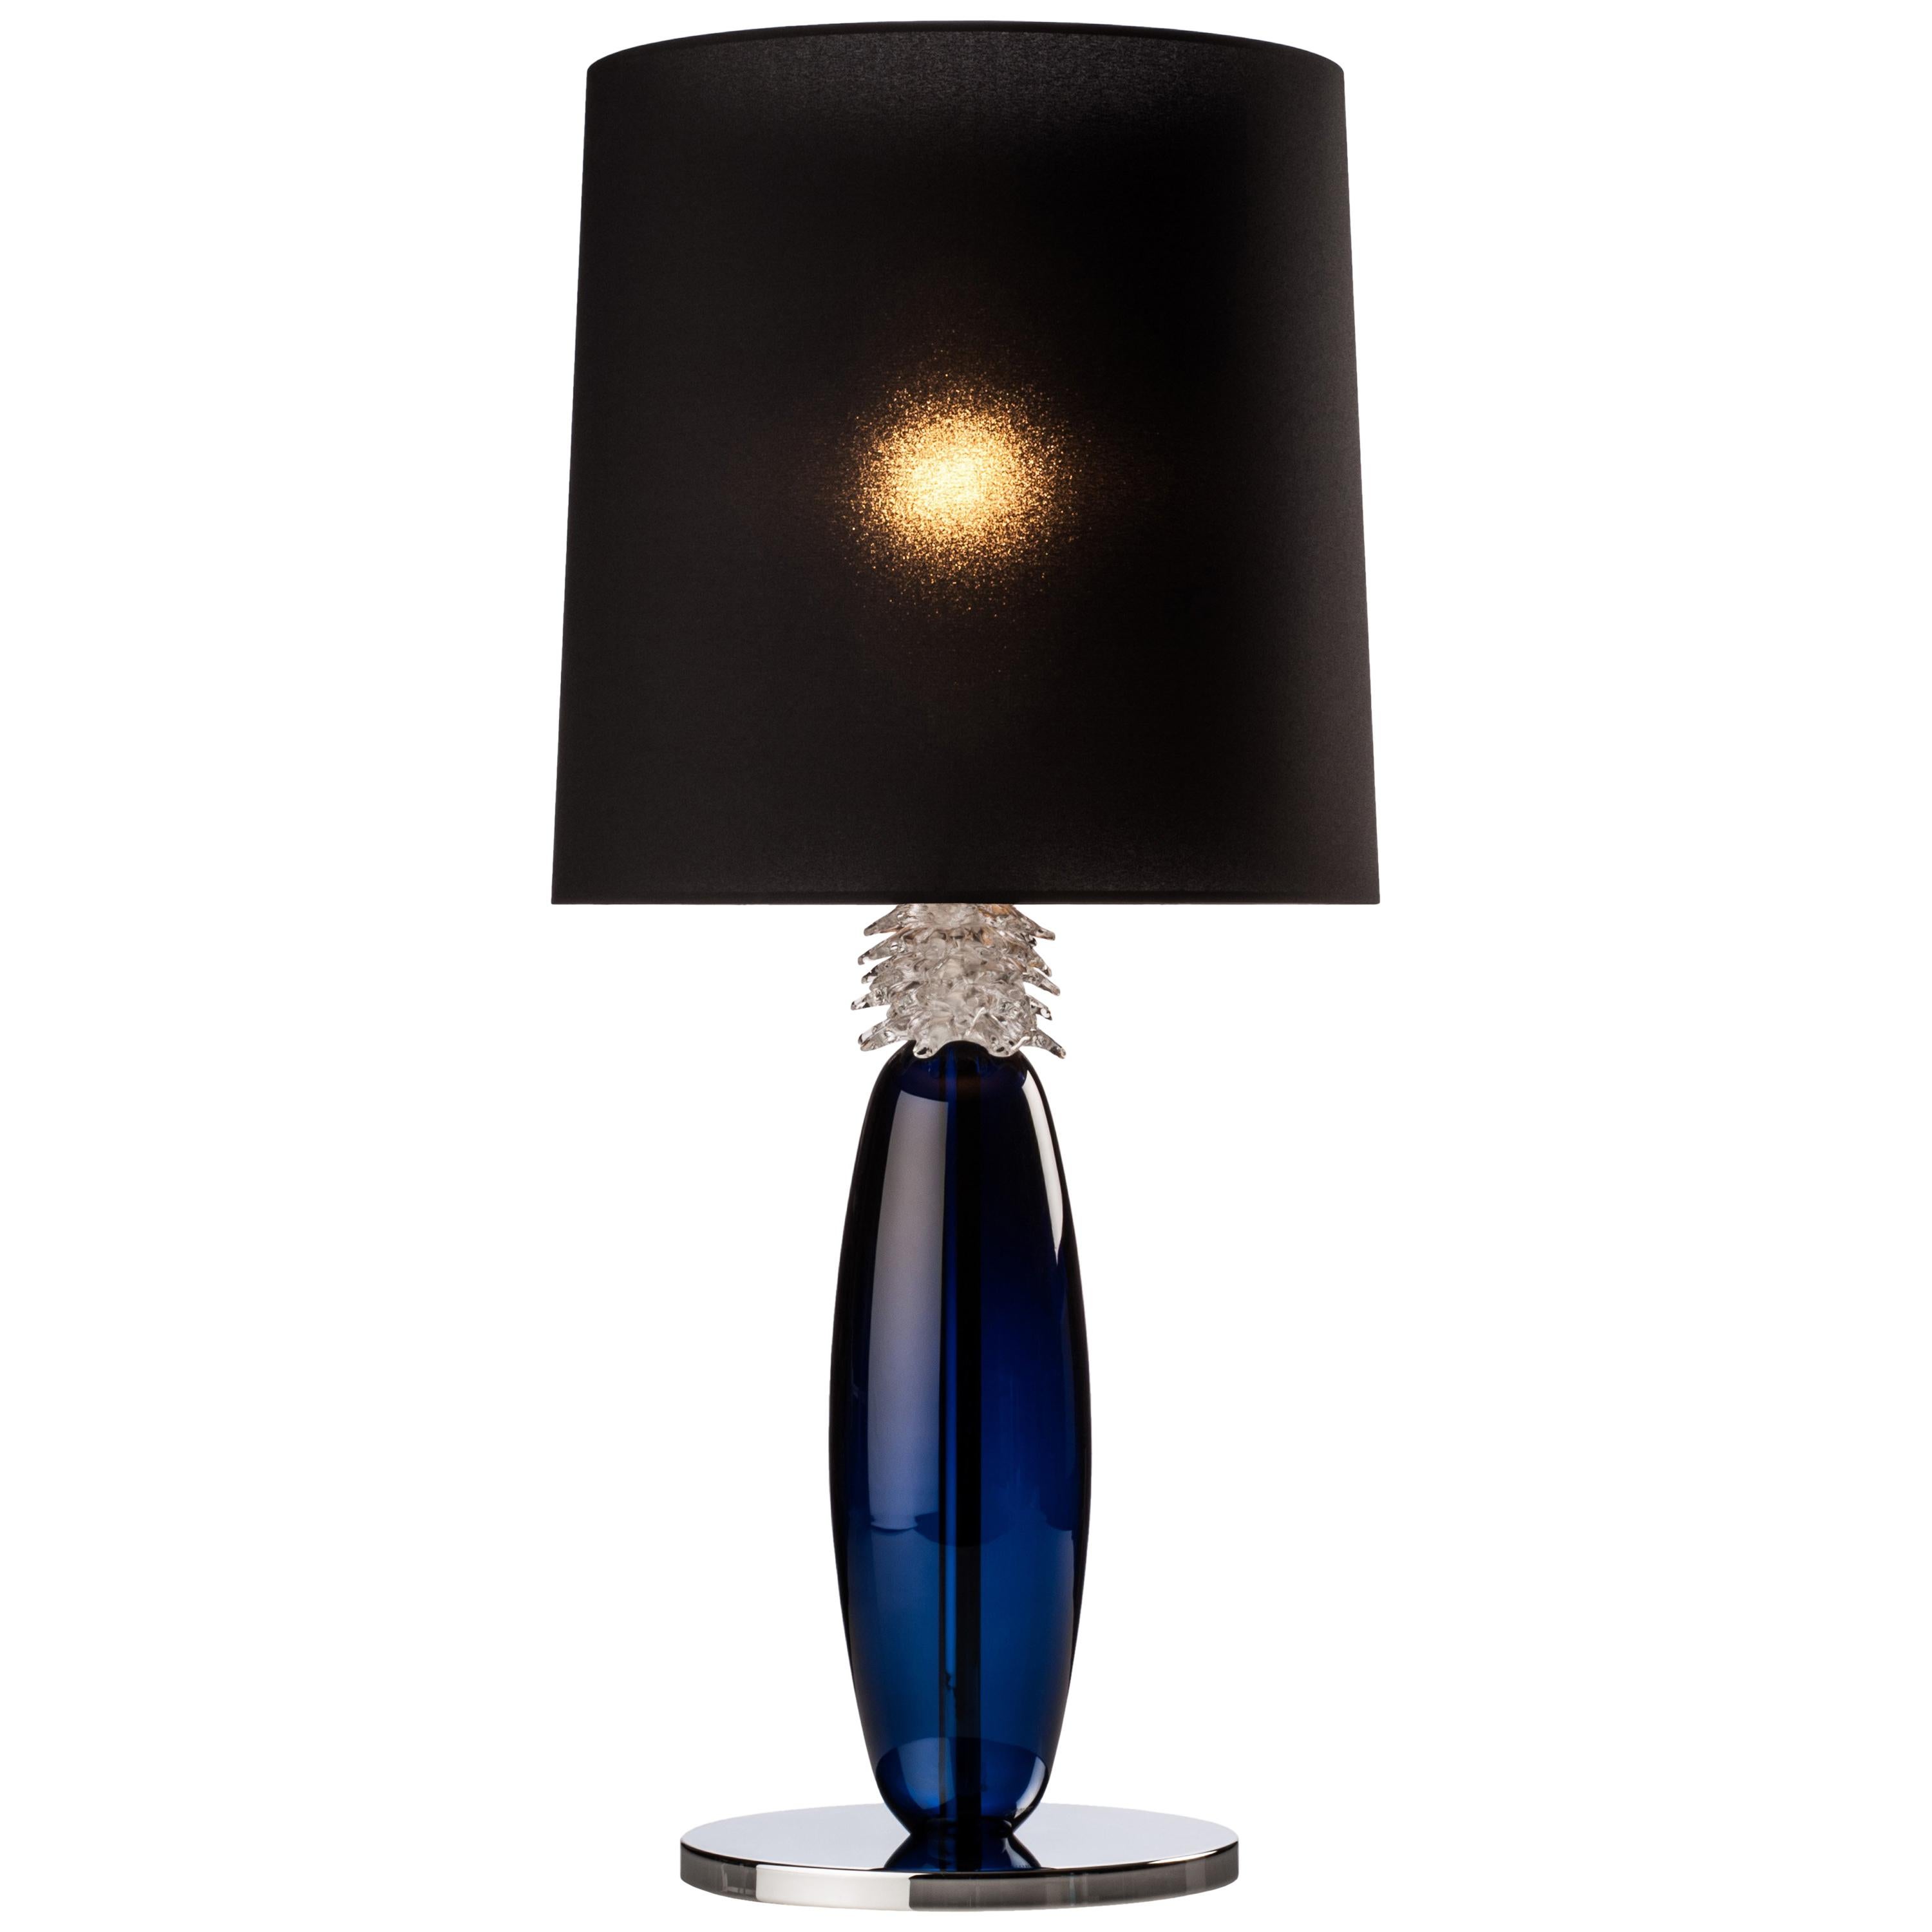 Visir Table Light in Transparent Blue and Black by Venini